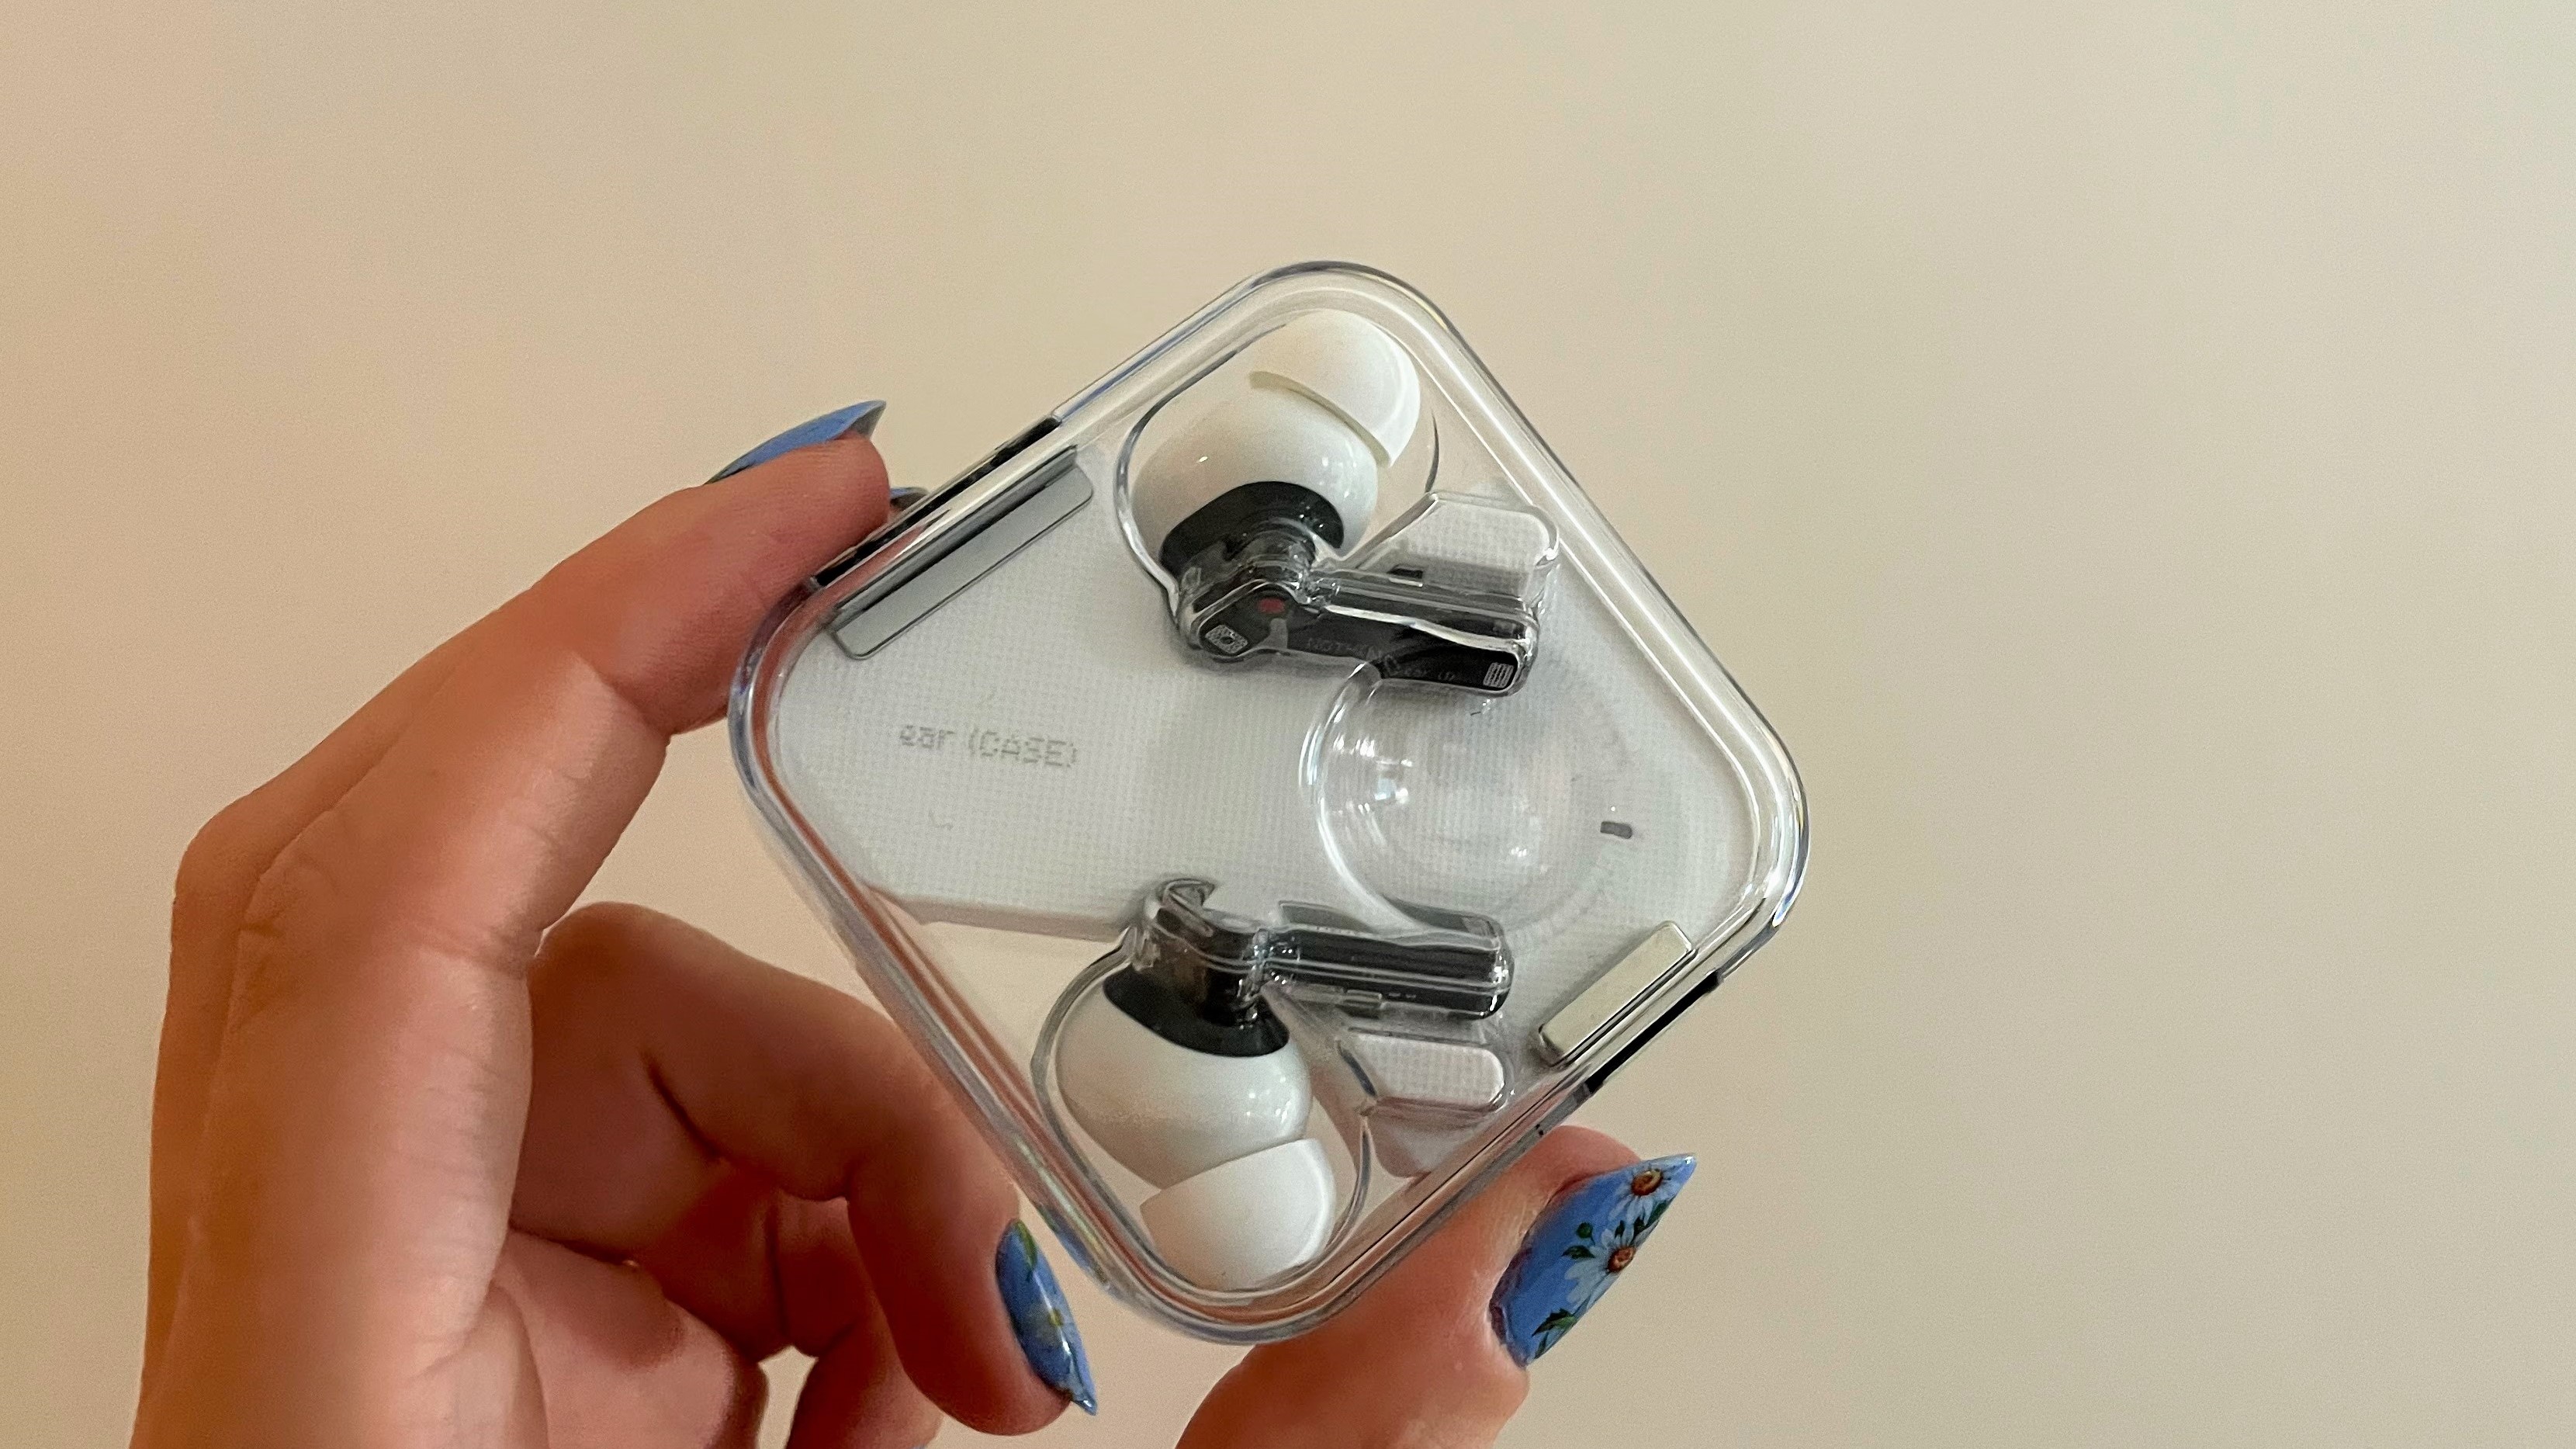 Nothing's Ear 1 wireless earbuds are an ambitious start